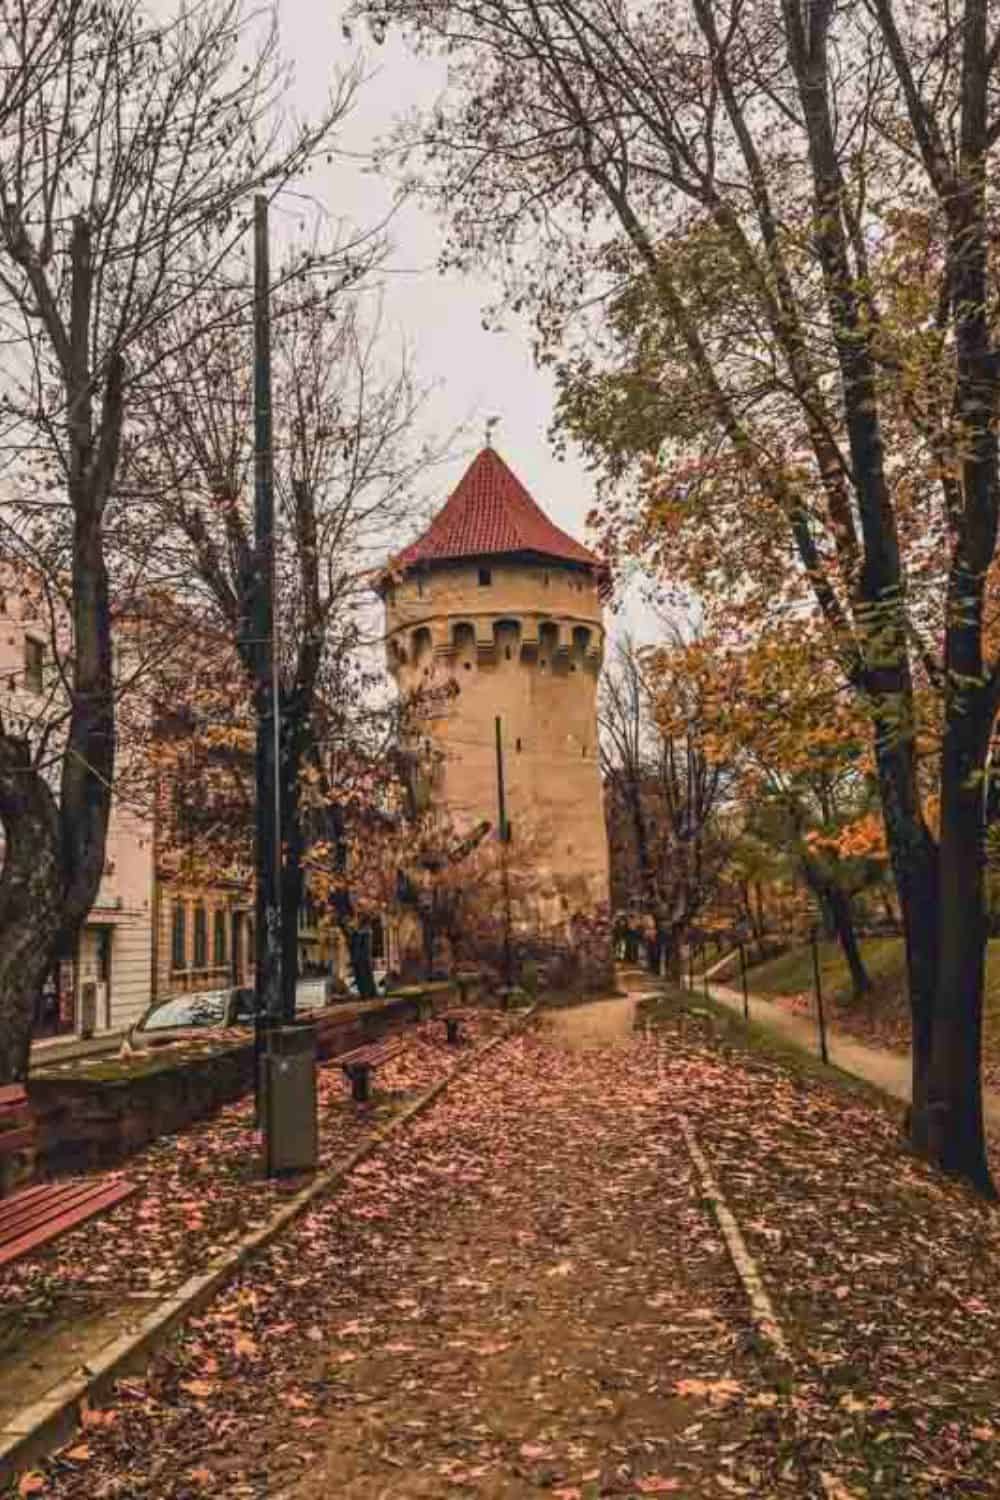 A tranquil autumn scene showing a cobblestone path strewn with fallen leaves leading to a historic stone tower with a pointed red roof, nestled among bare trees.